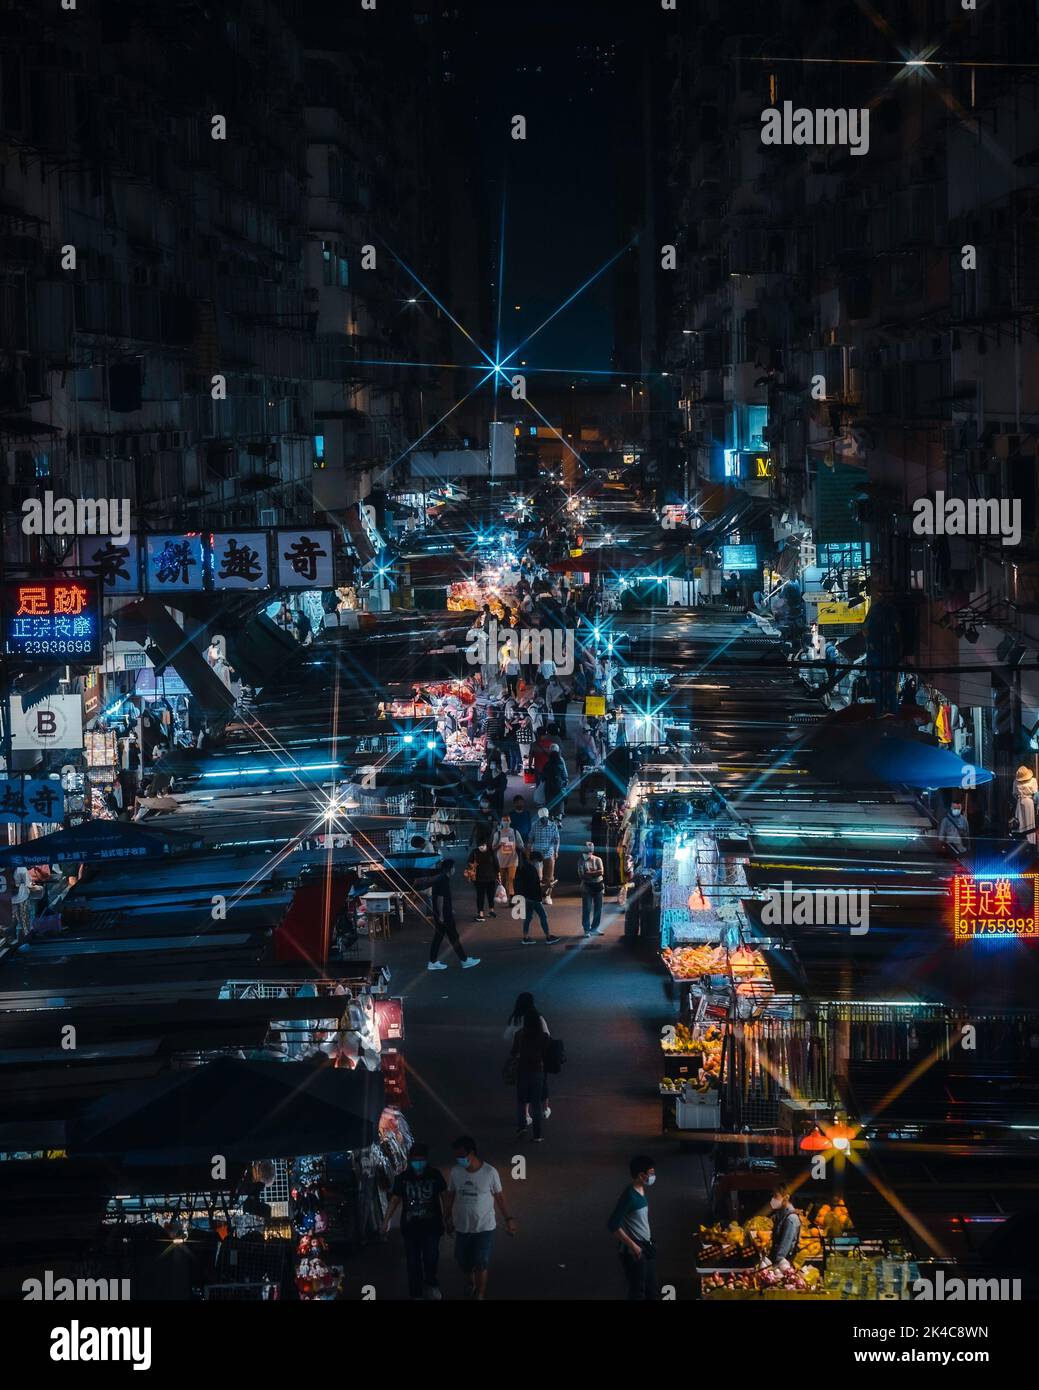 A vertical shot of a night street with a market and people Stock Photo